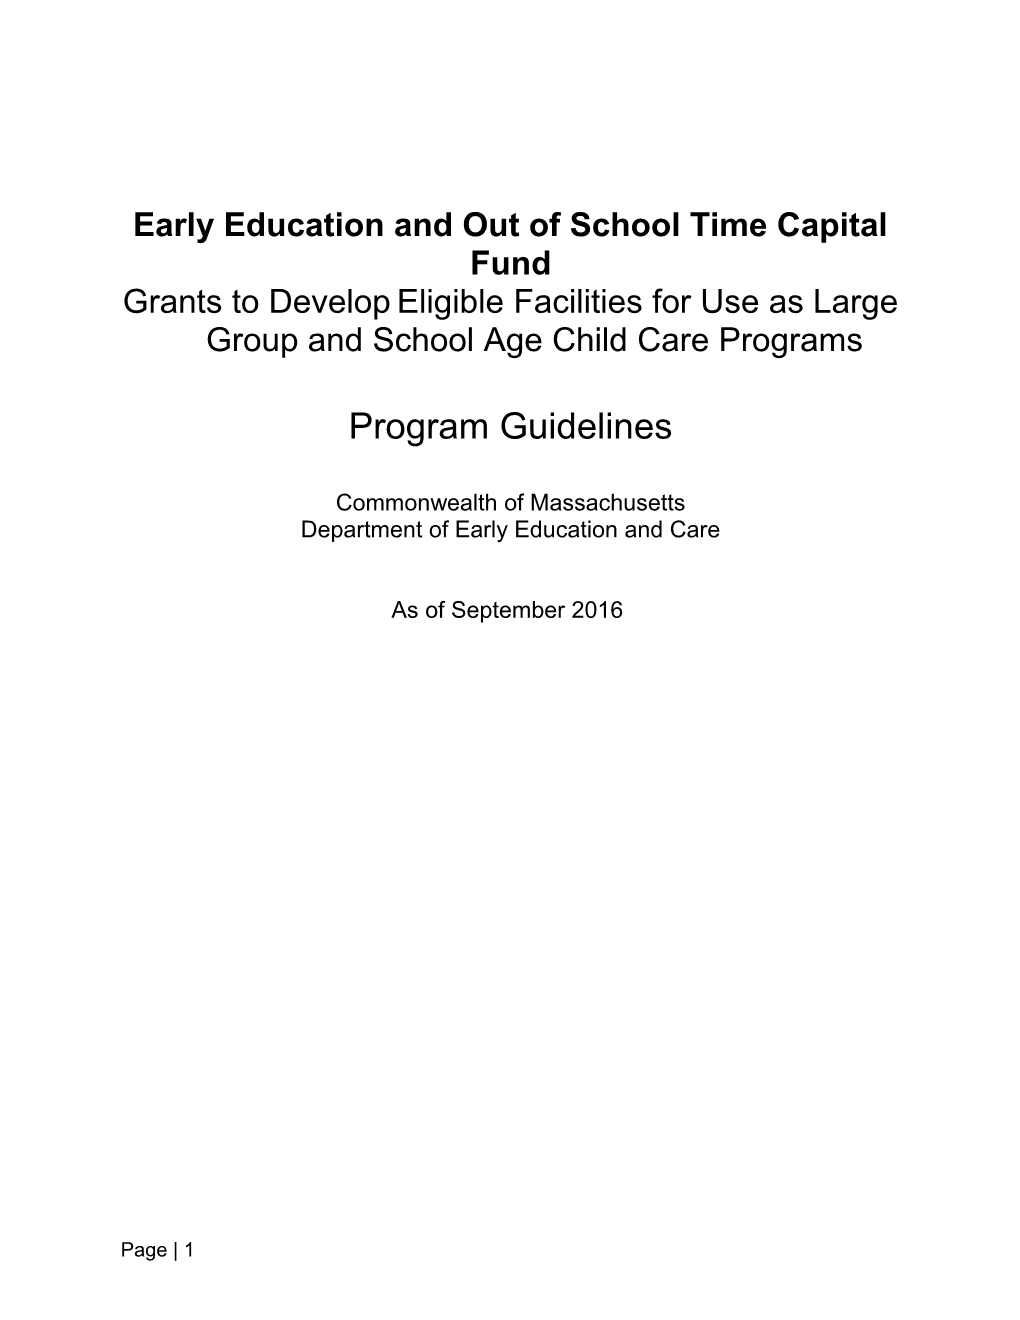 Early Education and out of School Time Capital Fund